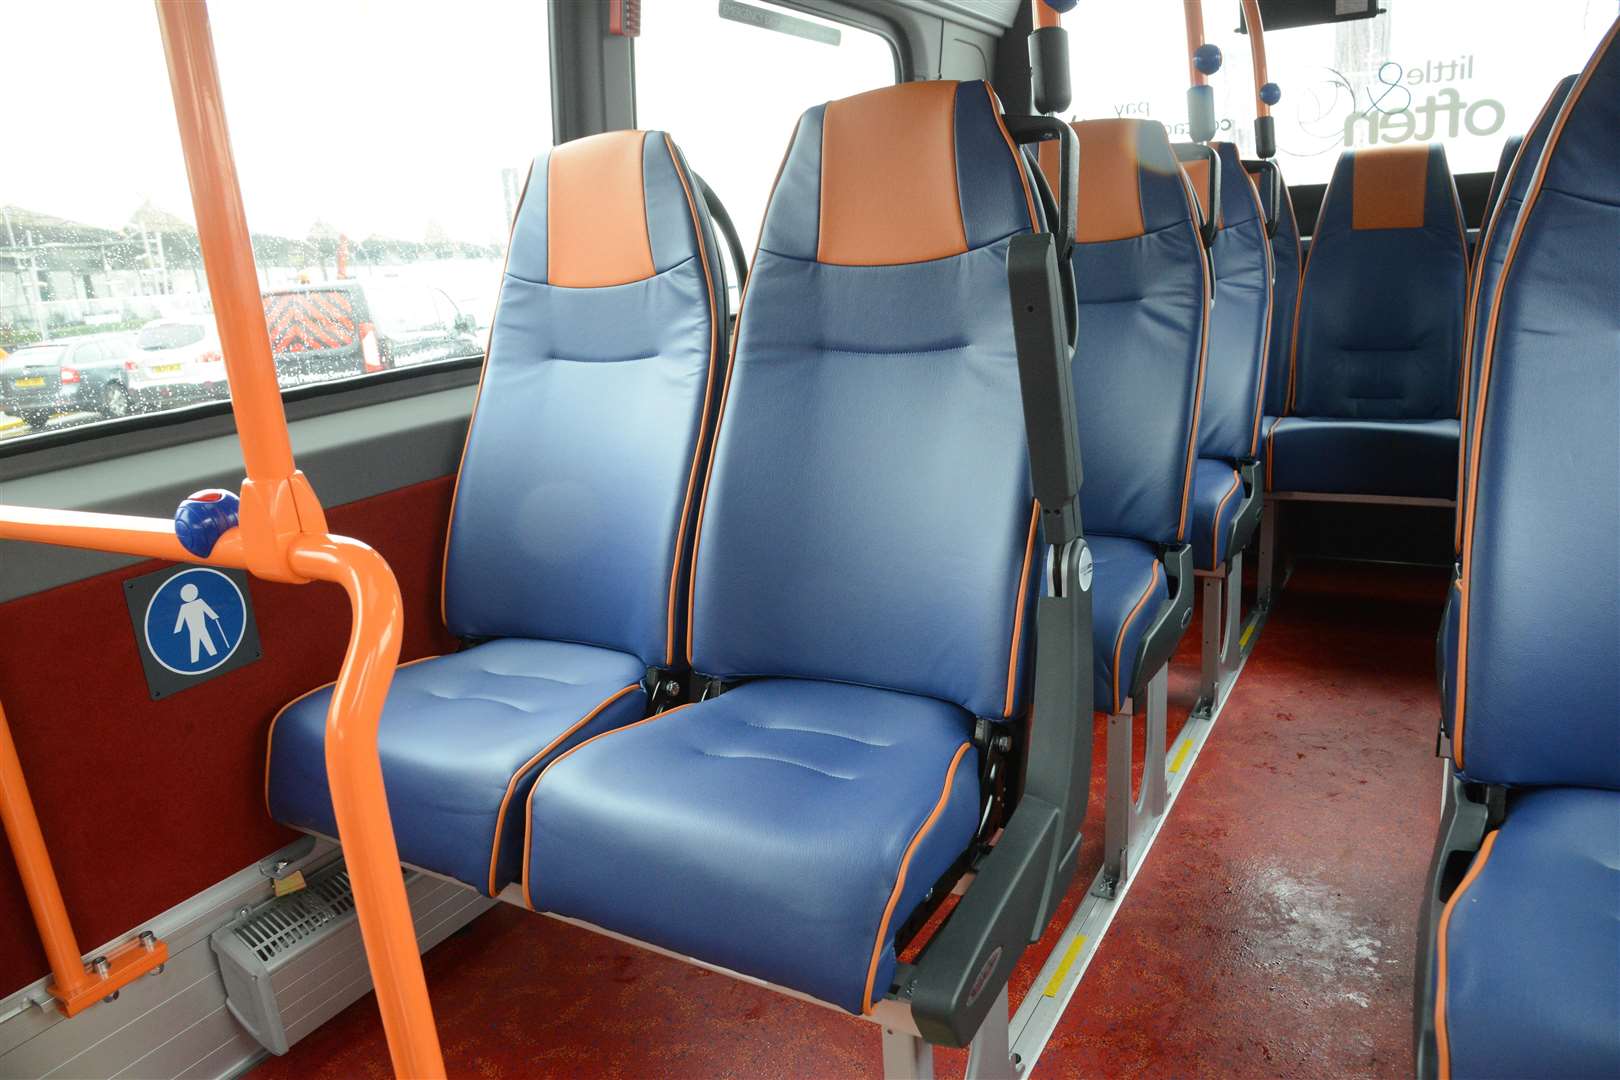 Leather seats formed part of the silver minibuses